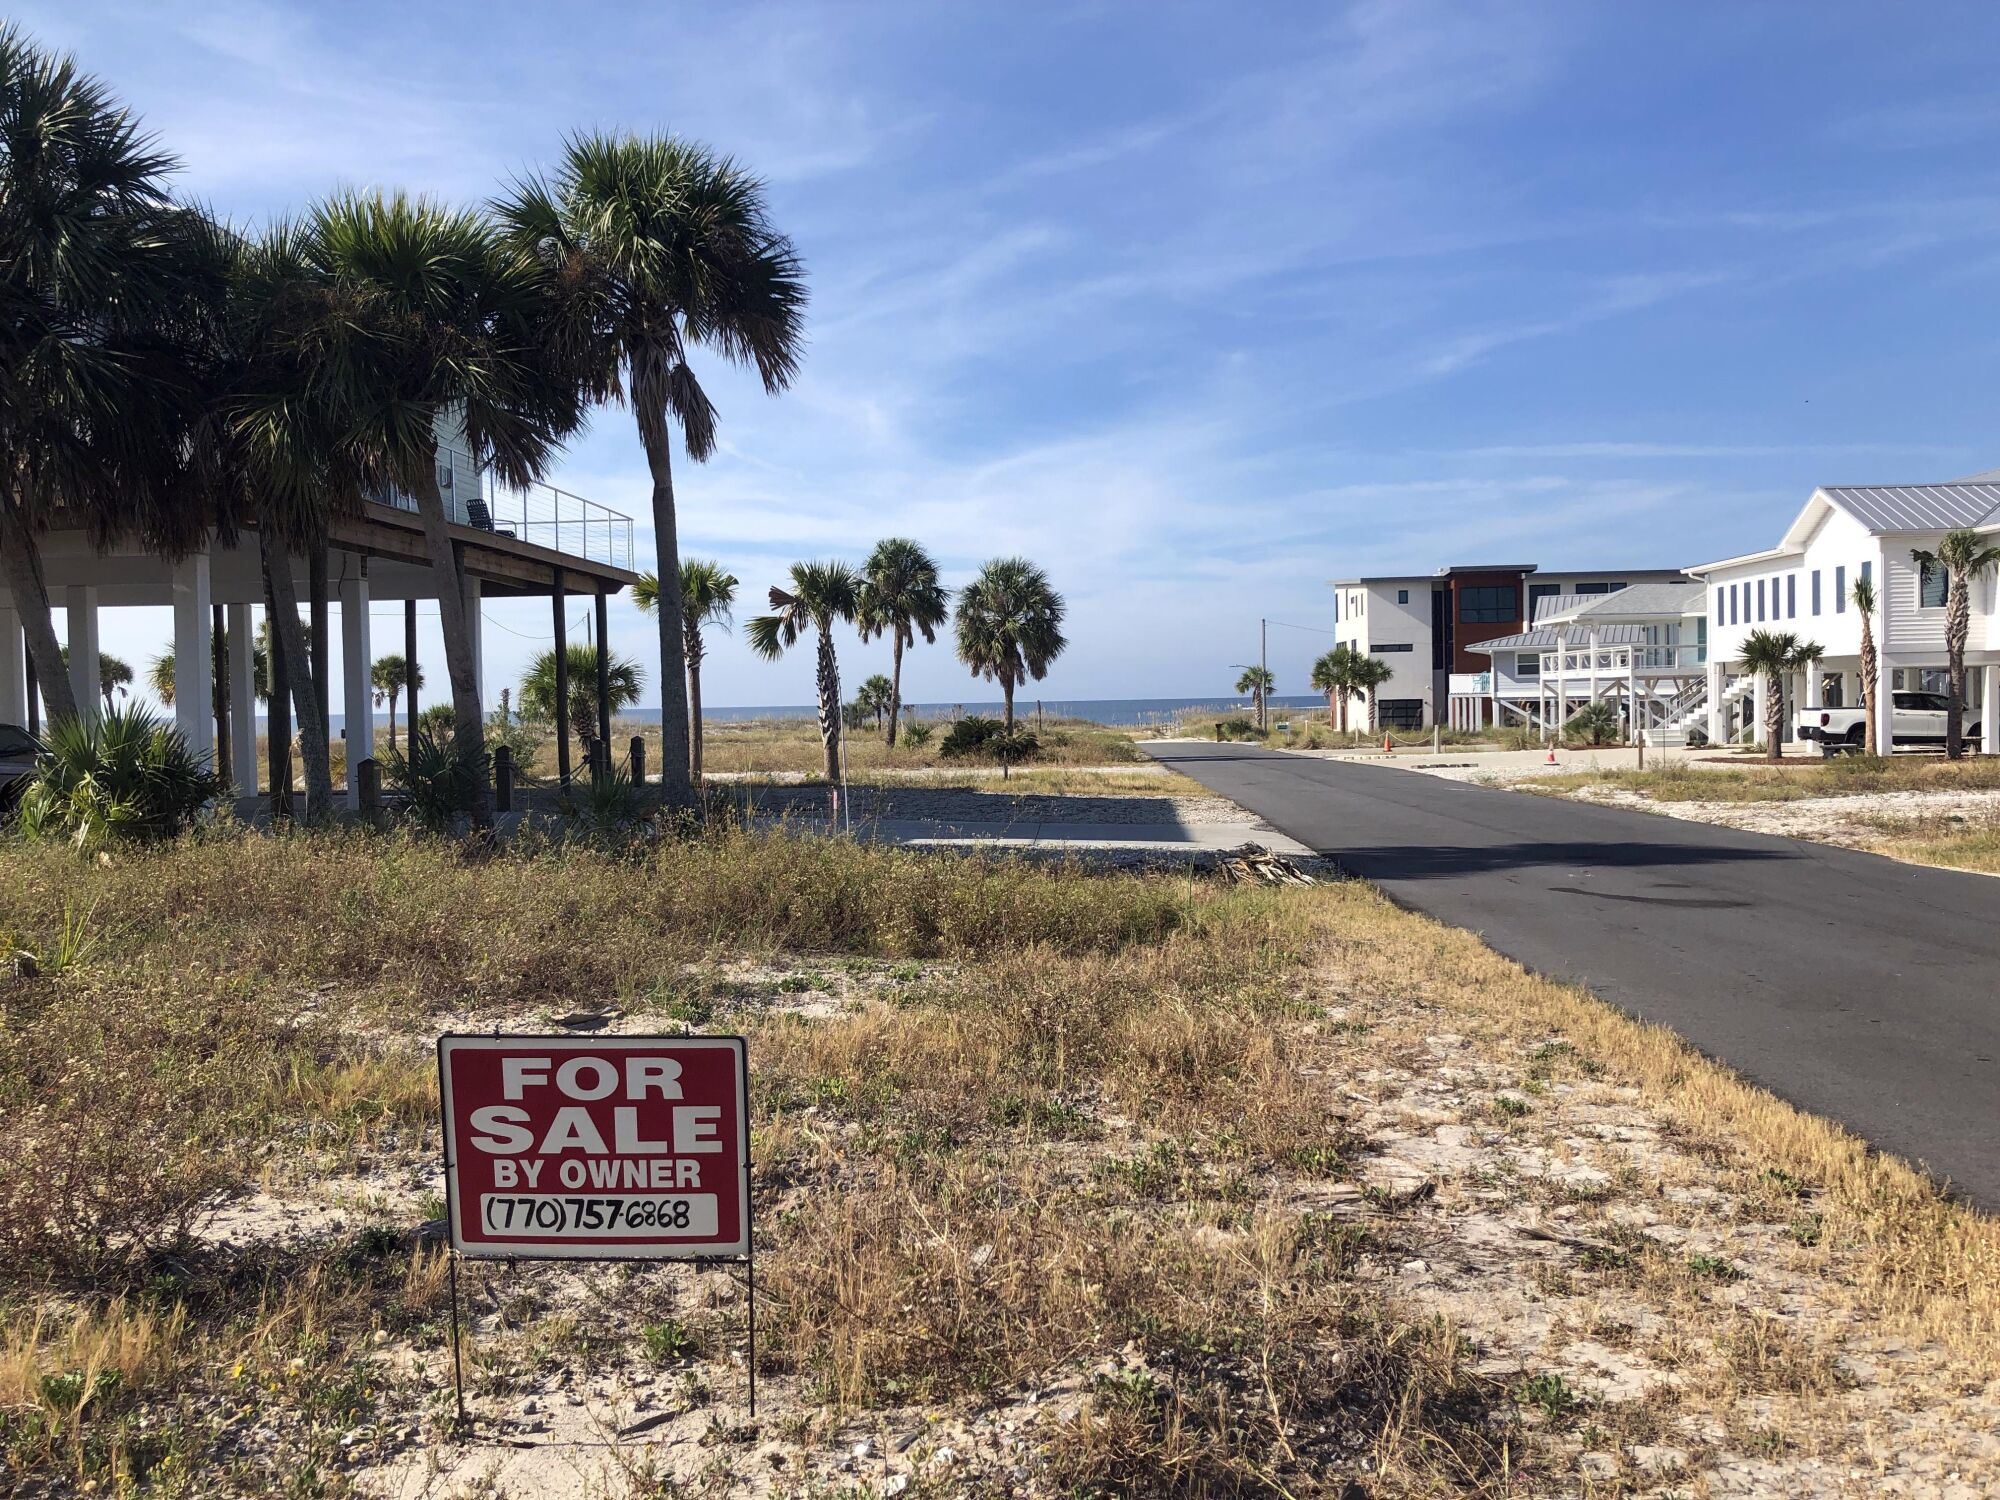 New homes are part of the rebuild of Mexico Beach after Hurricane Michael hit the town in 2018.